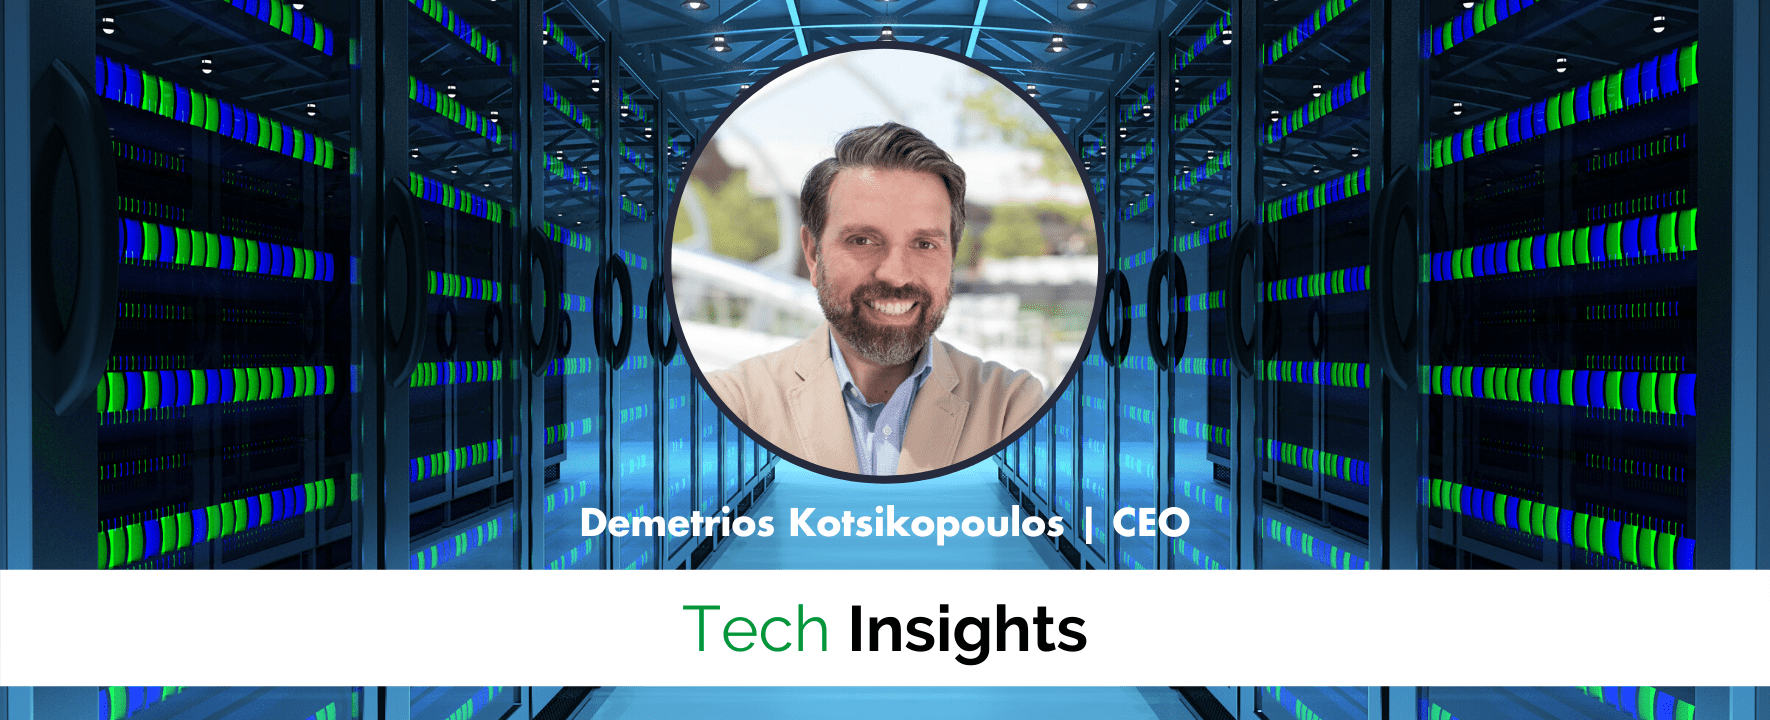 Demetrios Kotsikopolis Silectis hatchpad thought leader interview